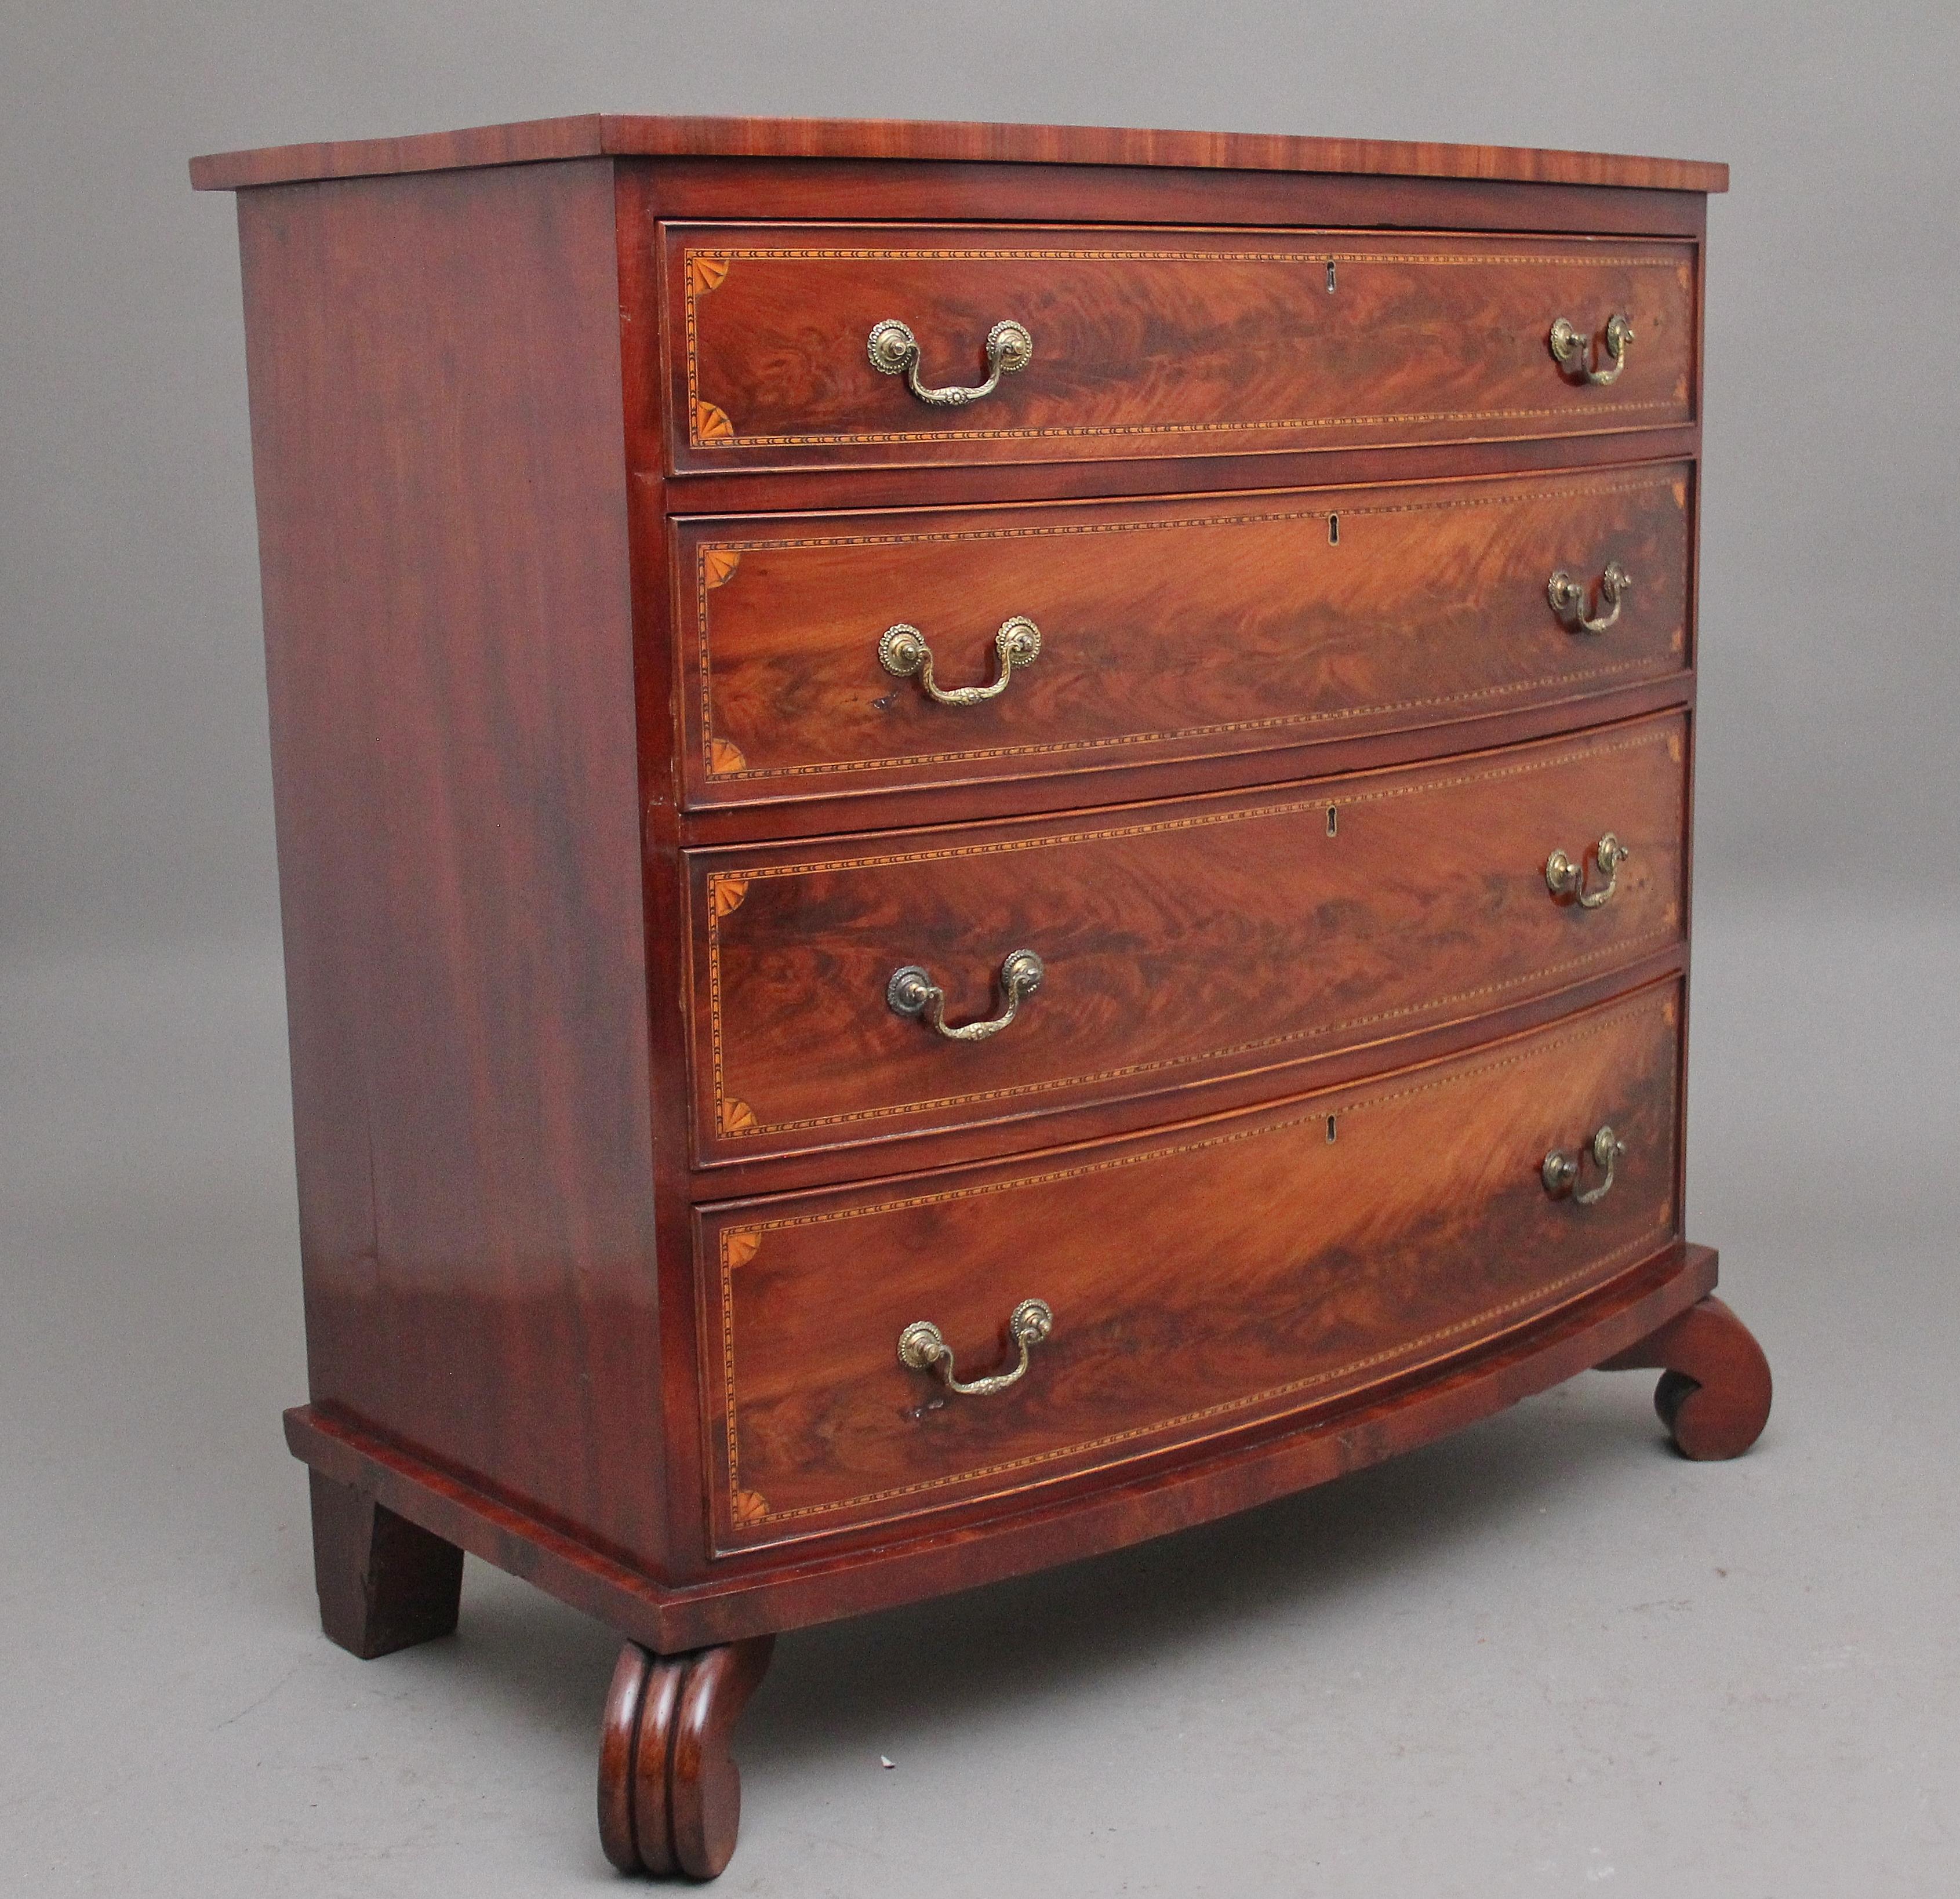 A highly decorative early 19th Century flame mahogany and inlaid bowfront chest of drawers, the figured shaped top above four graduated drawers with brass engraved swan neck handles, the drawer fronts having decorative chequered inlay around the